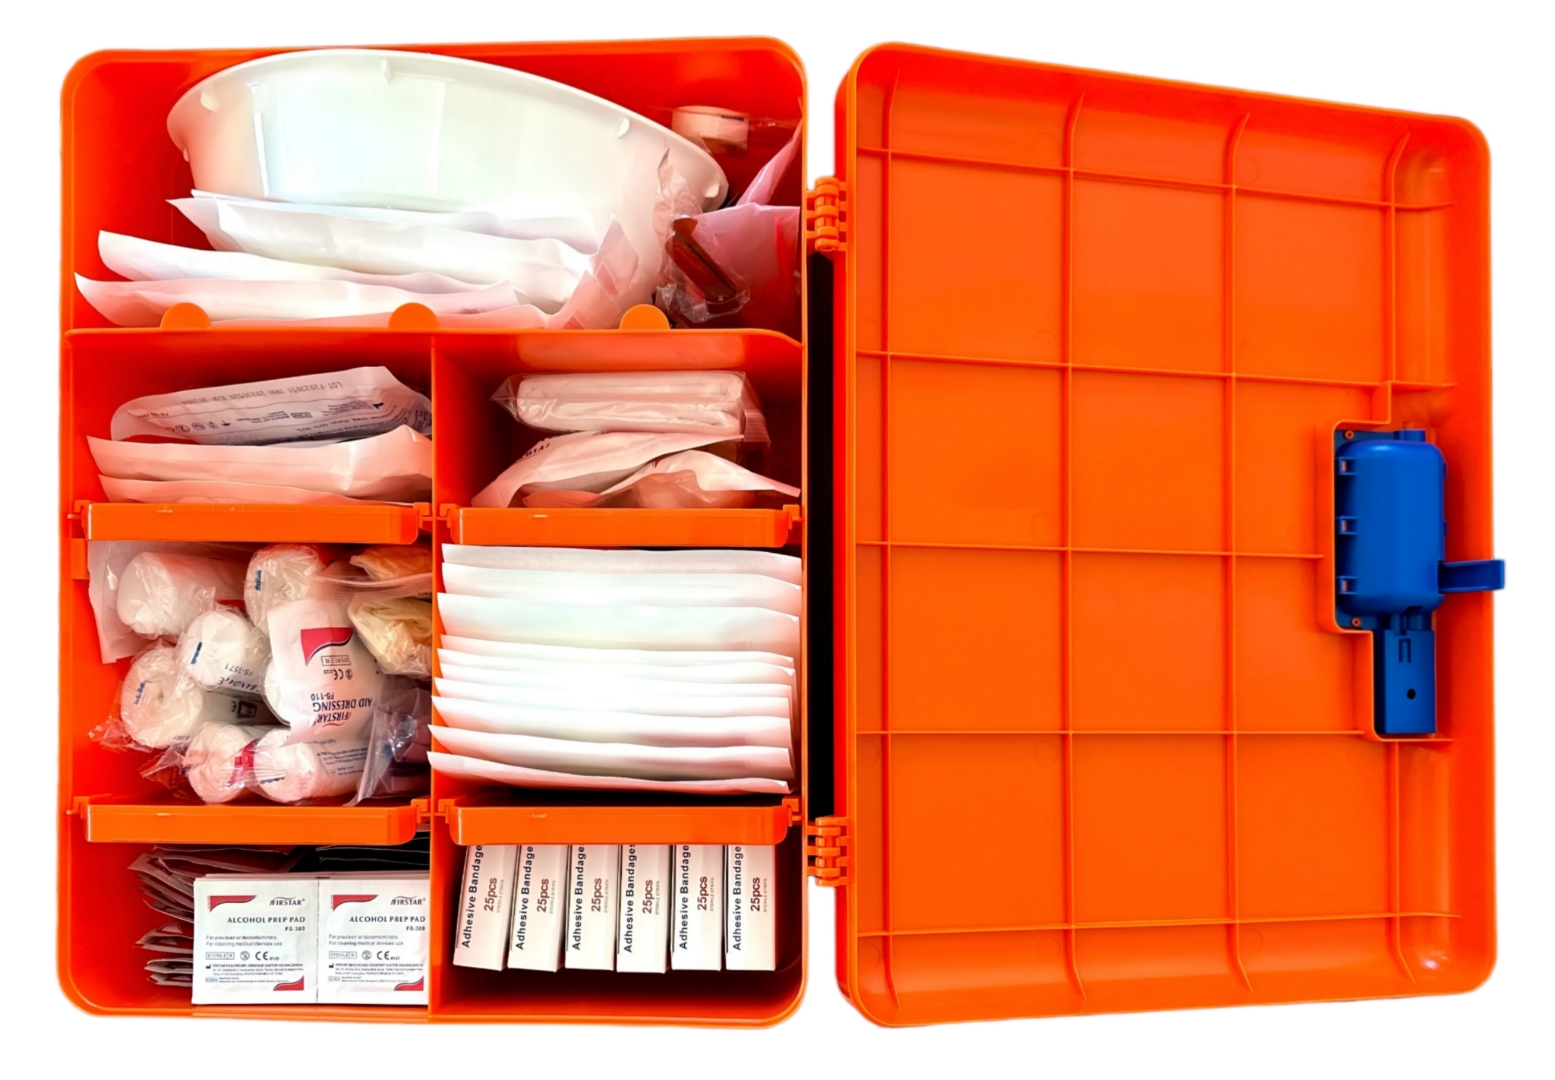 Commercial size First Aid Kit